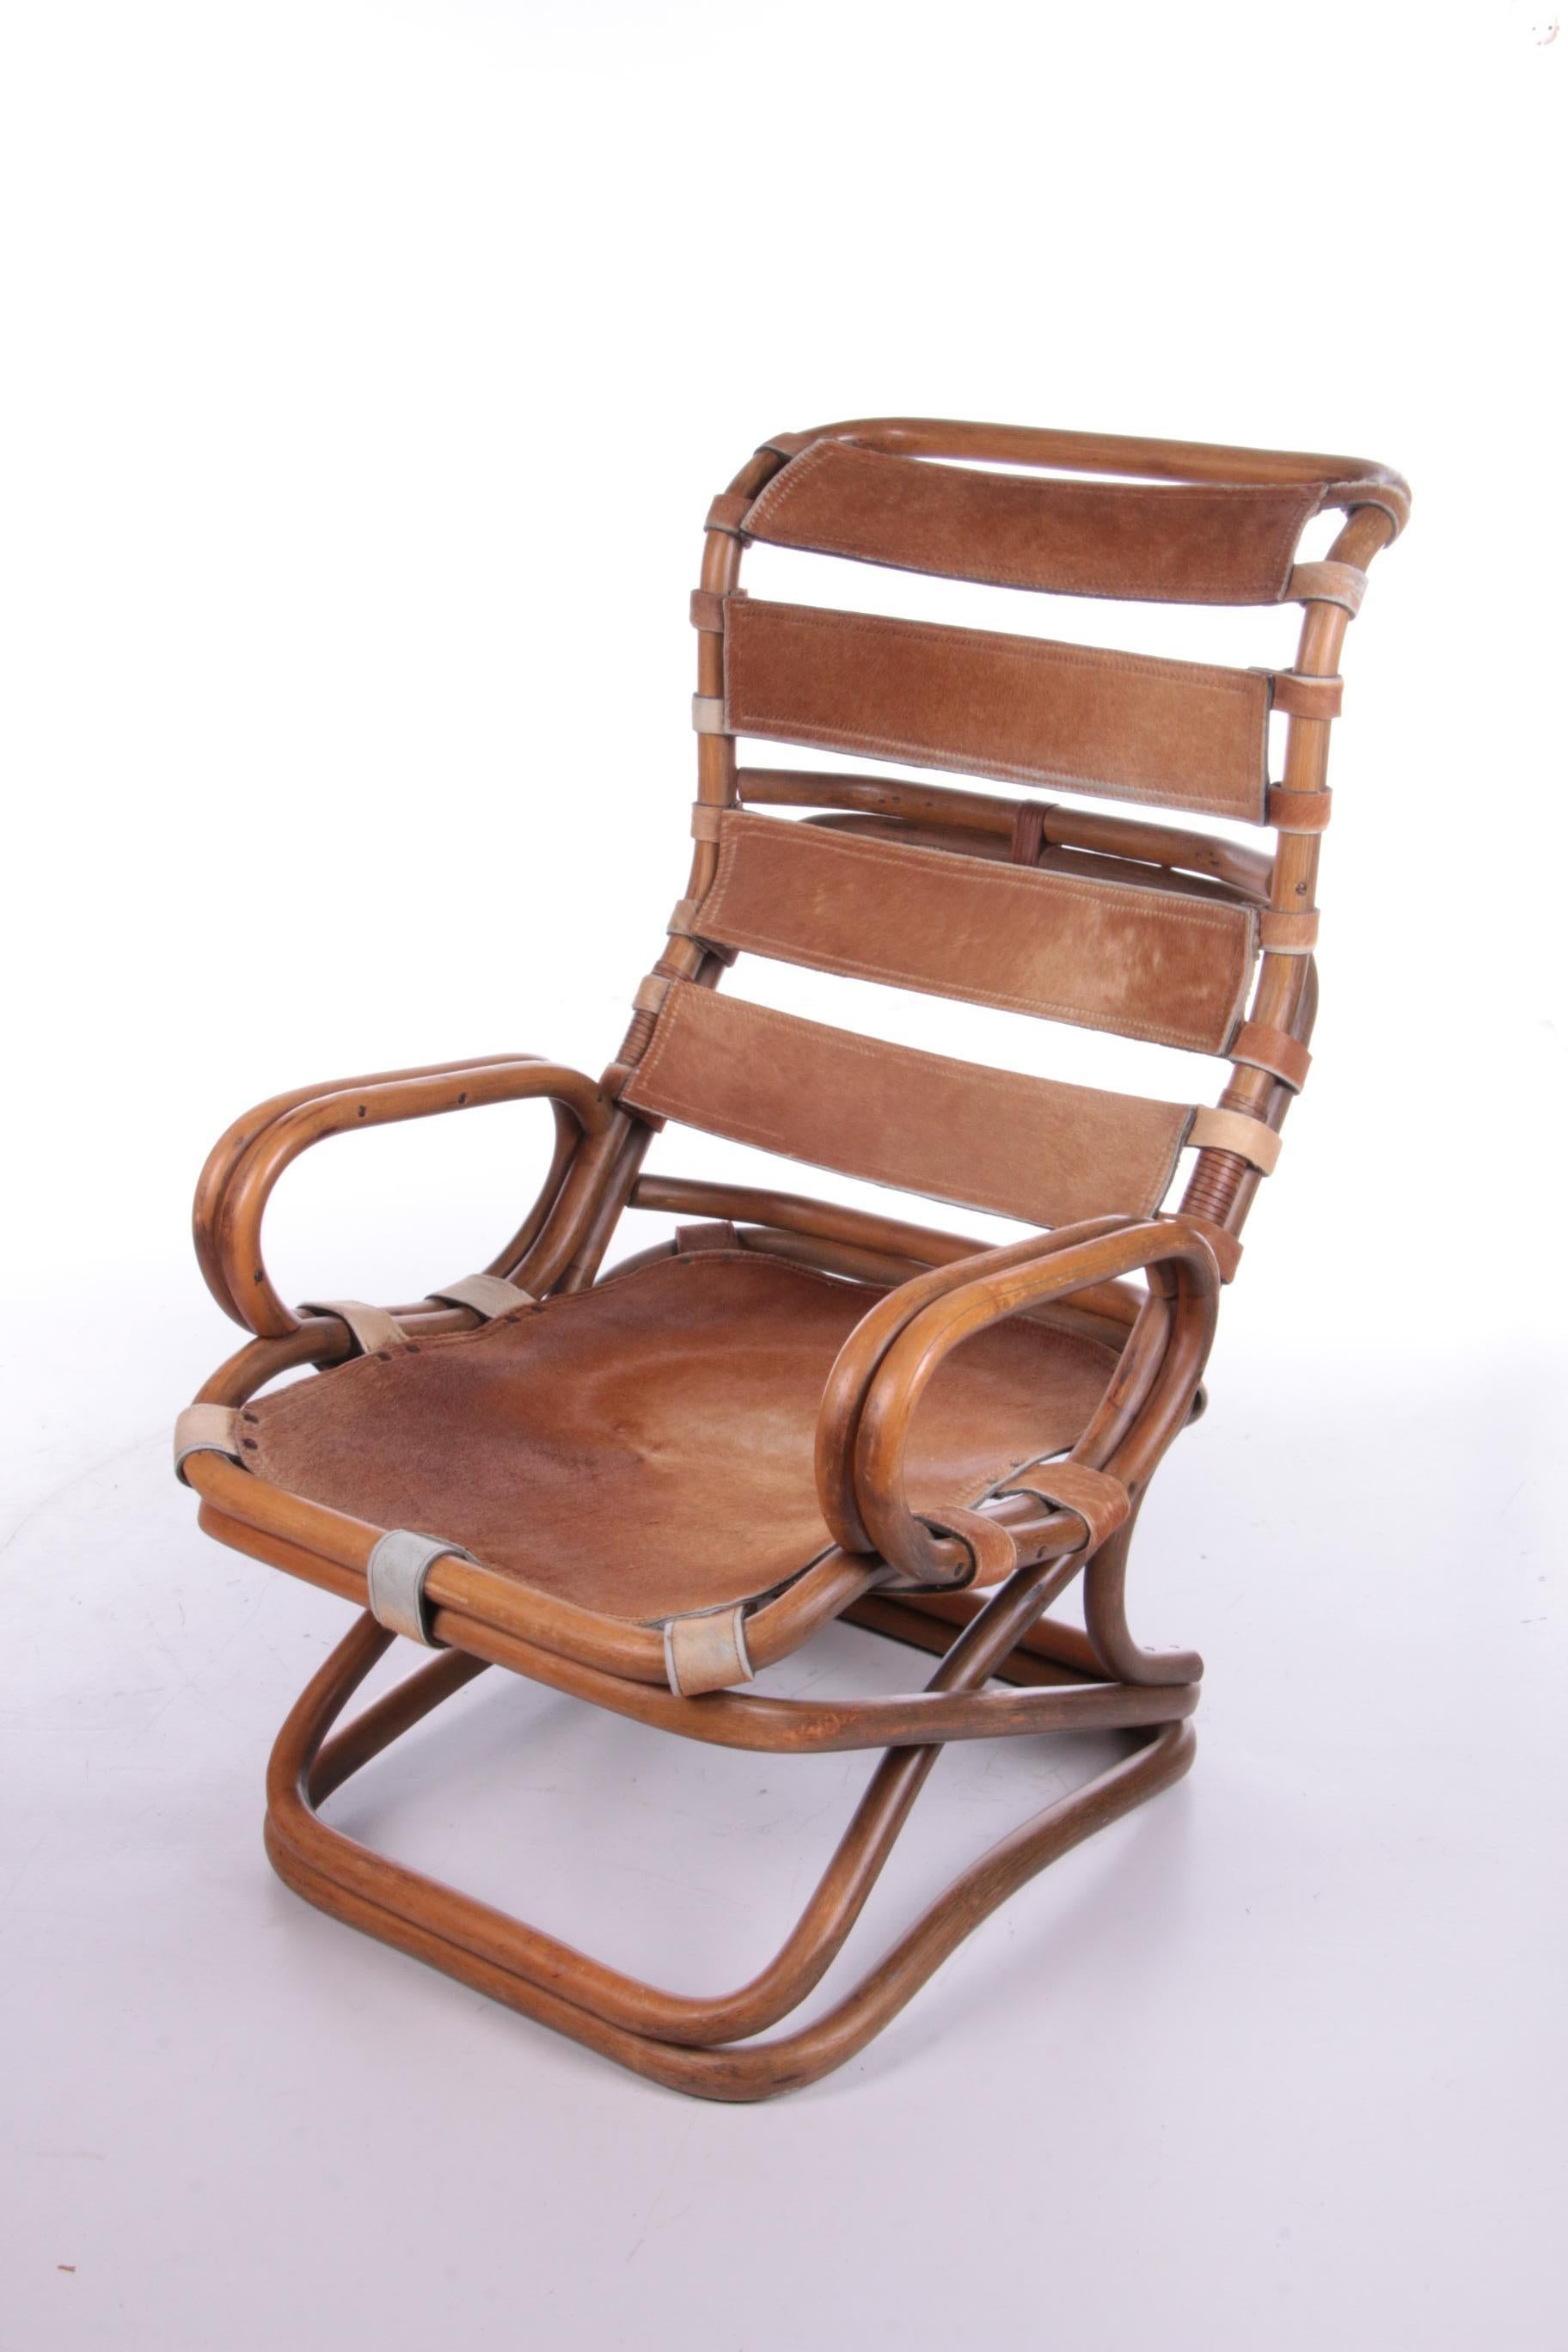 Tito Agnoli relax chair made of bamboo and leather, 1960.

Tito Agnoli designed this rattan and horse leather armchair manufactured by Pierantonio Bonacina, circa 1960.

It is a design from Italy and there are not many left.

The leather is horse